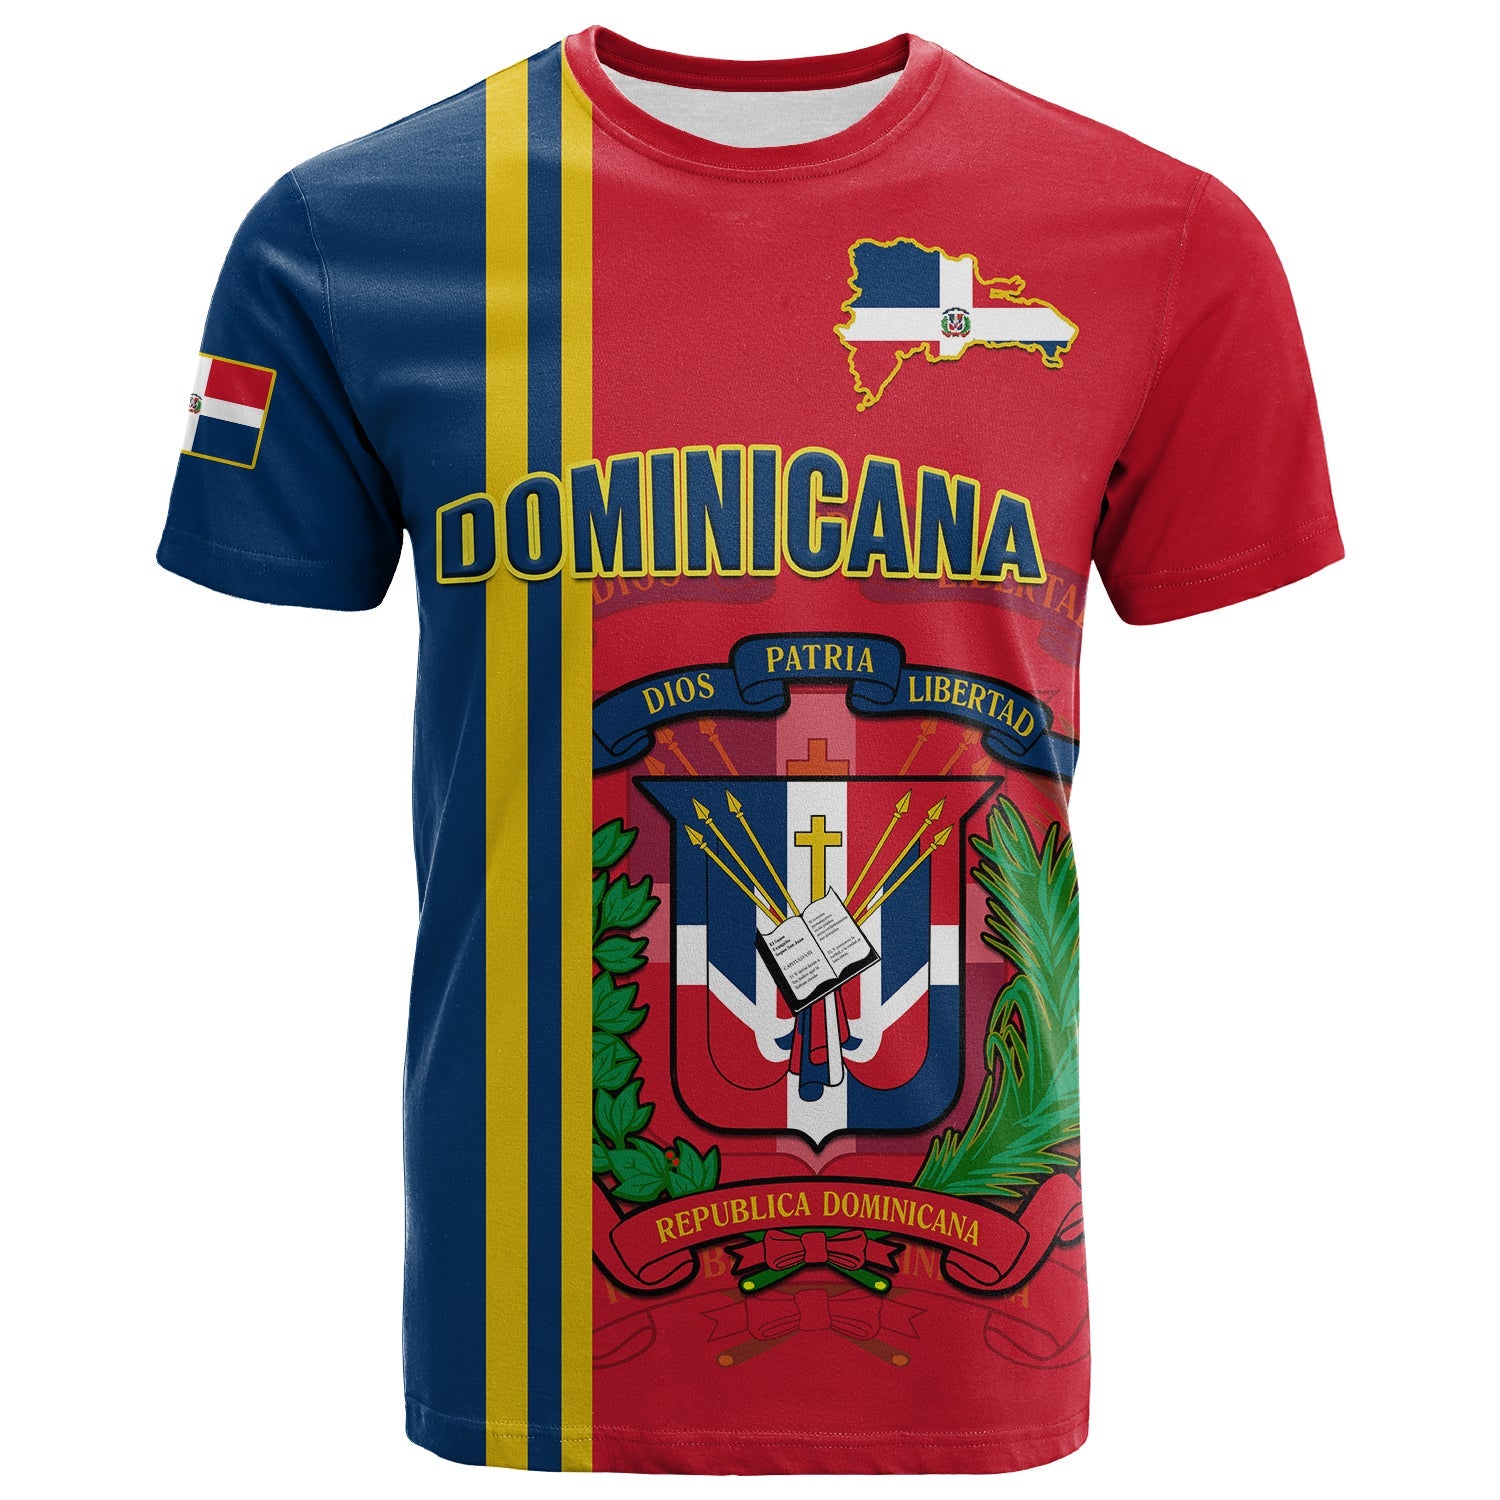 dominican-republic-t-shirt-happy-179-years-of-independence